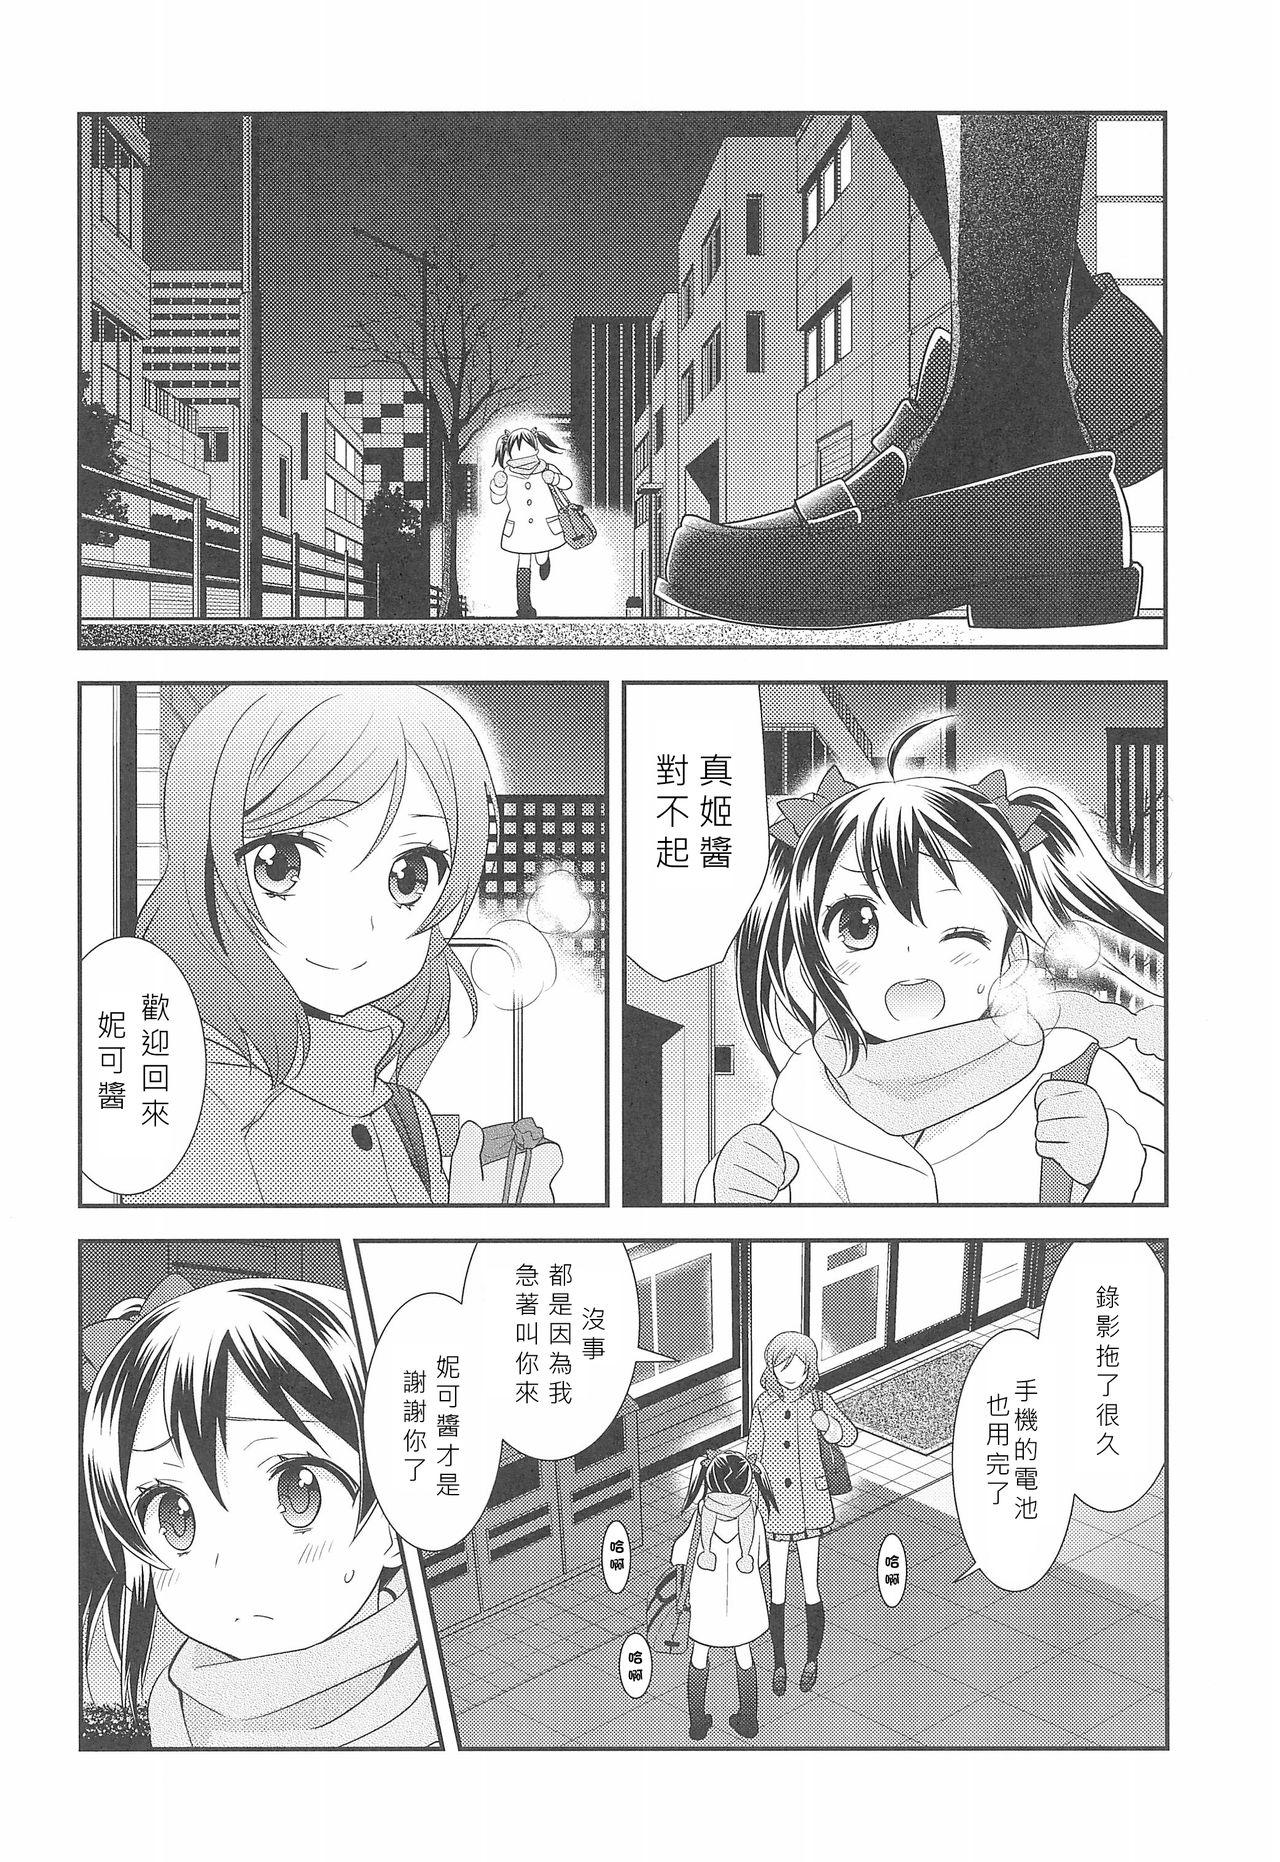 Body BABY I LOVE YOU - Love live Masterbation - Page 5